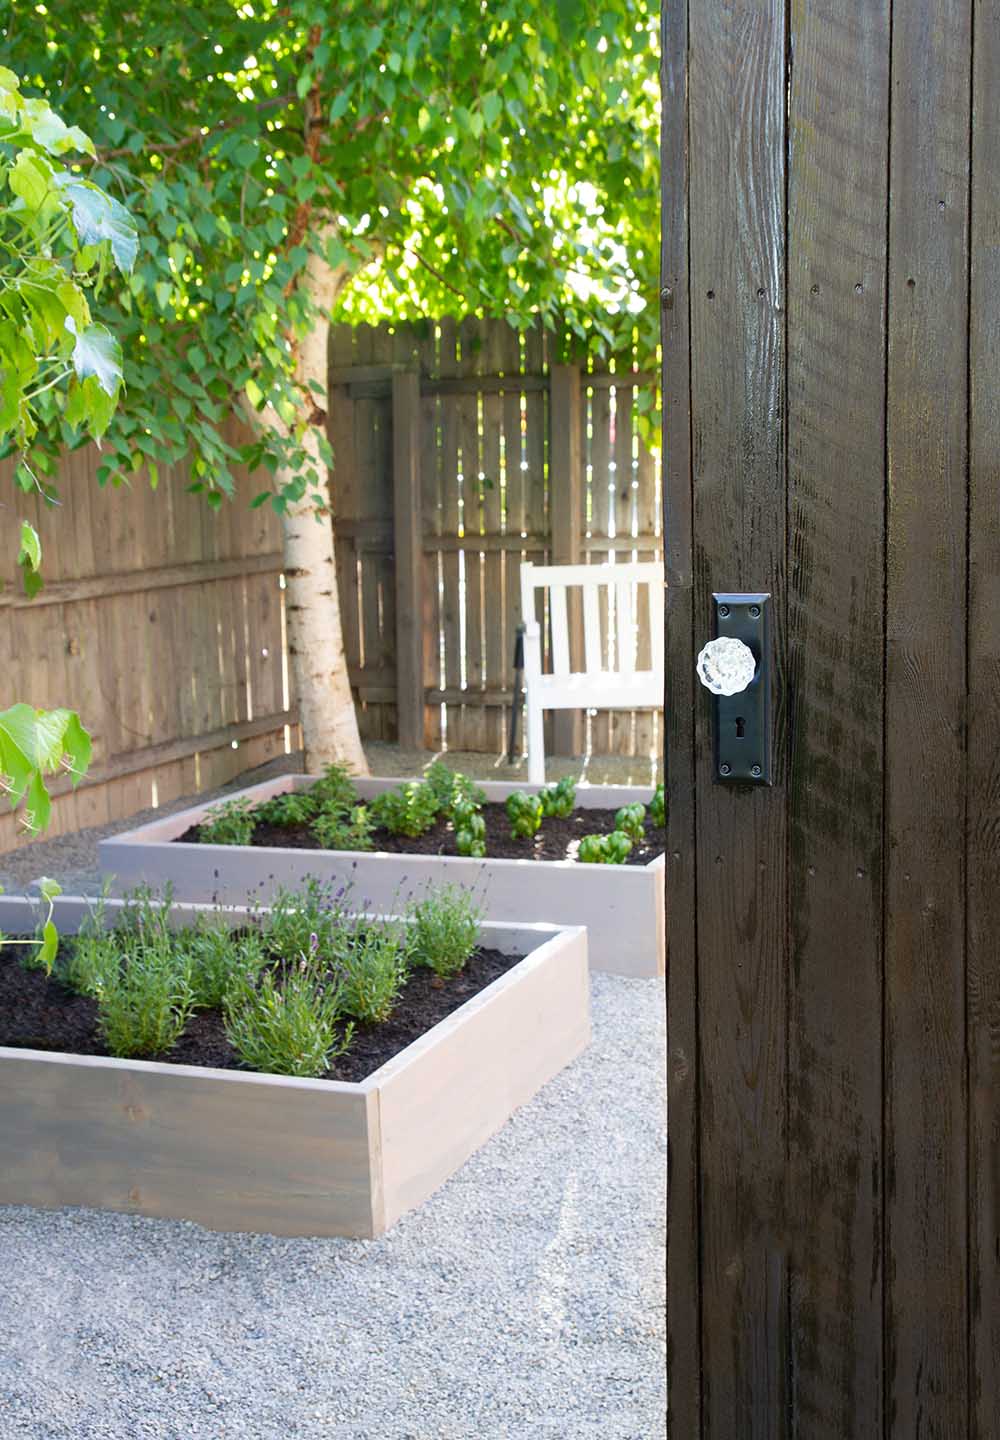 A wooden door opens to a backyard with raised herb garden beds.